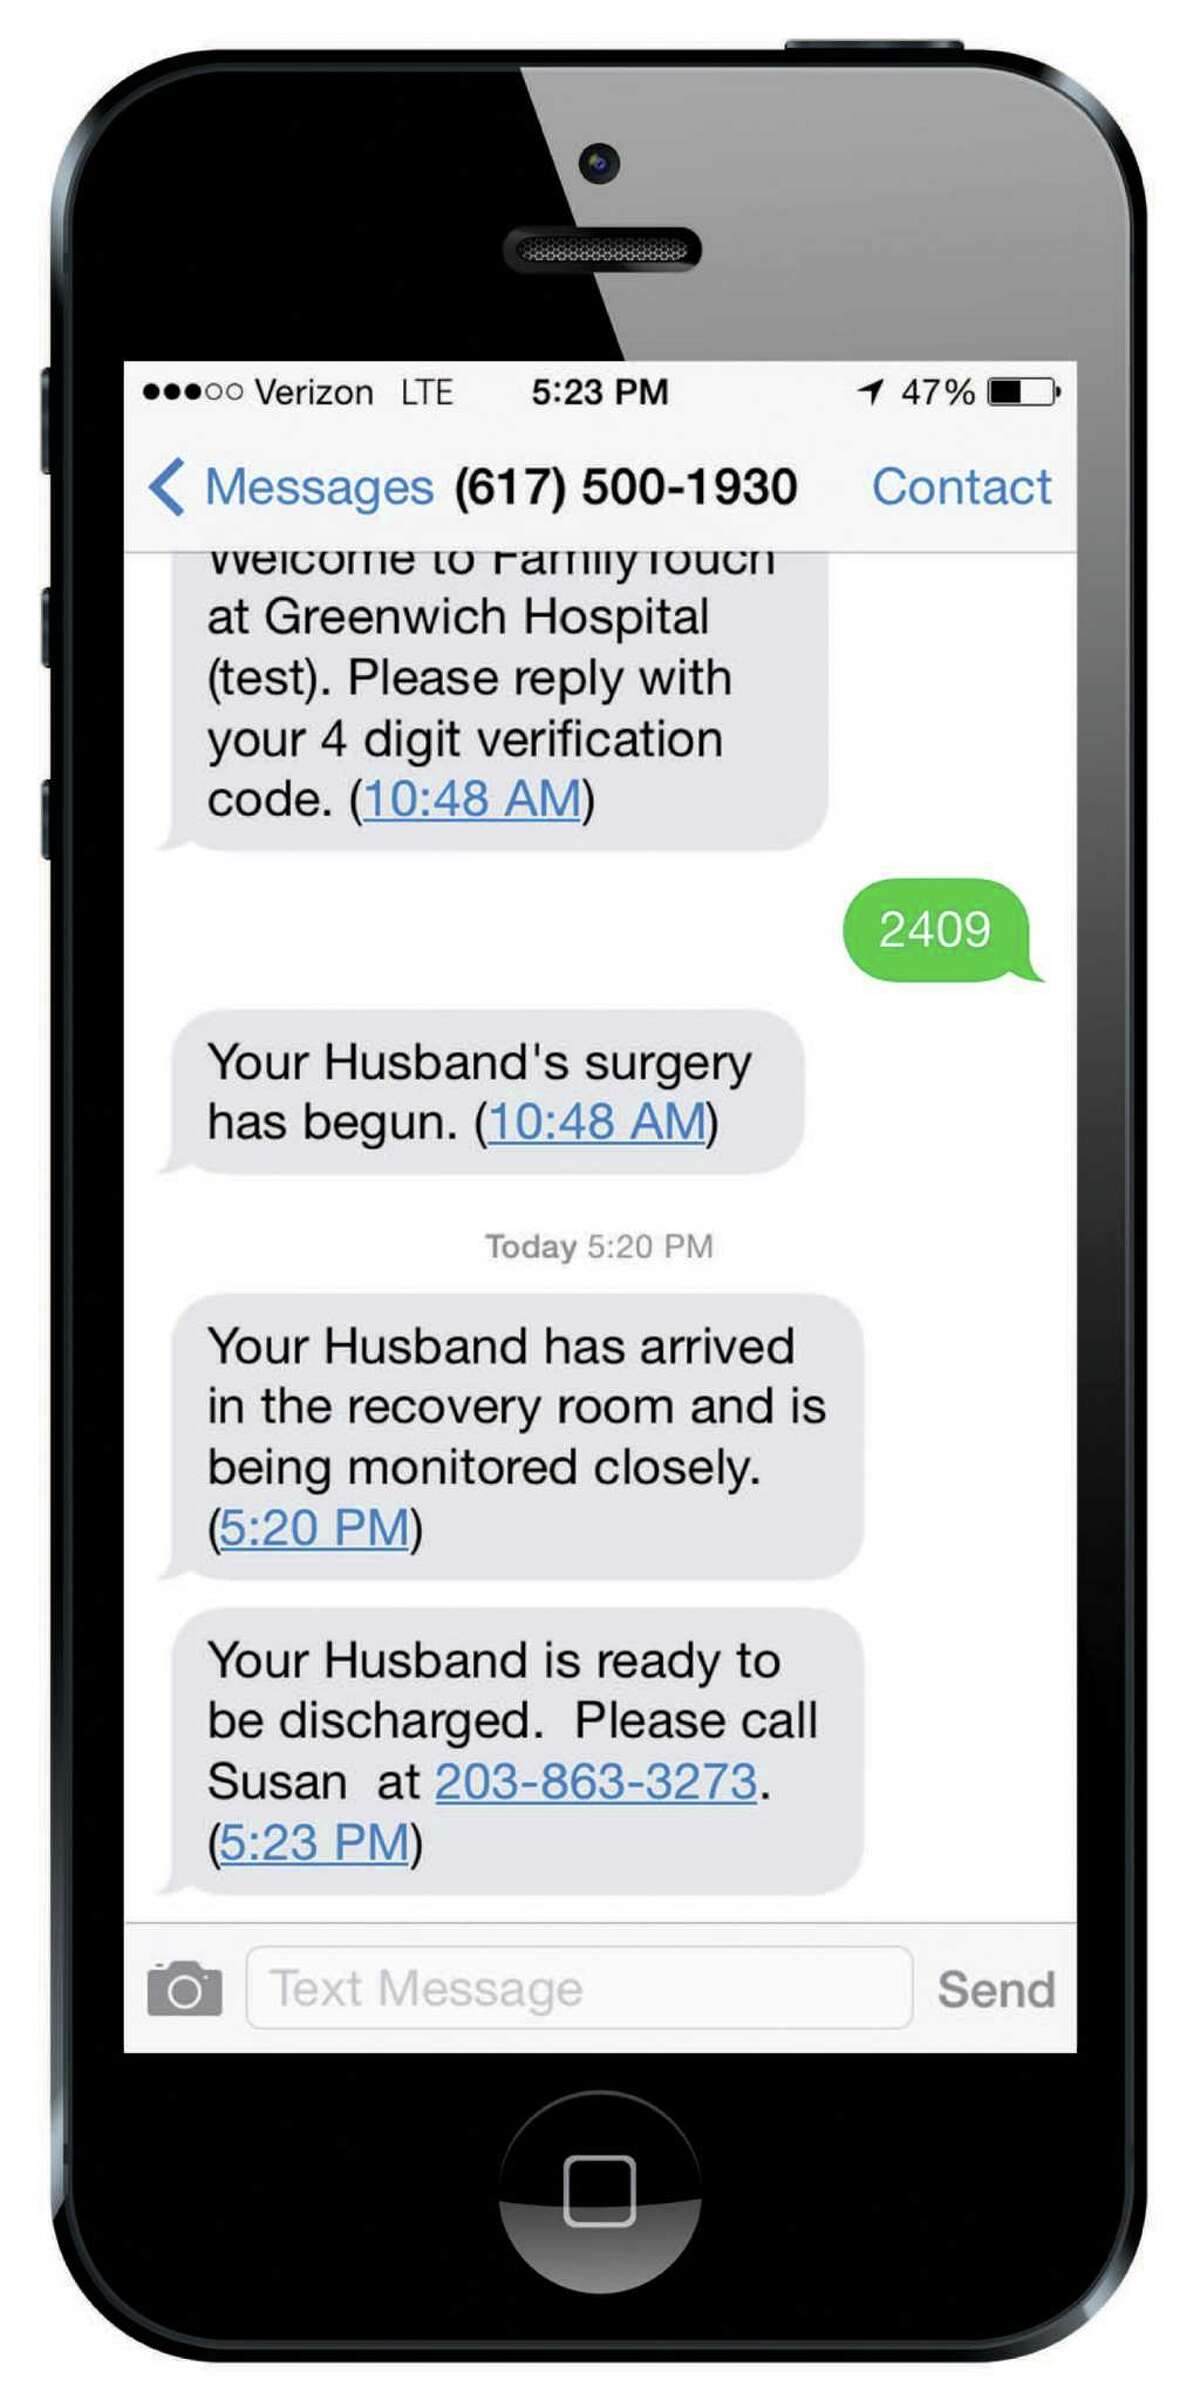 Greenwich Hospital is offering a service that allows patients getting ambulatory surgery to have their health care team text friends and family about their progress. It's one of several unique ways hospitals are using technology.